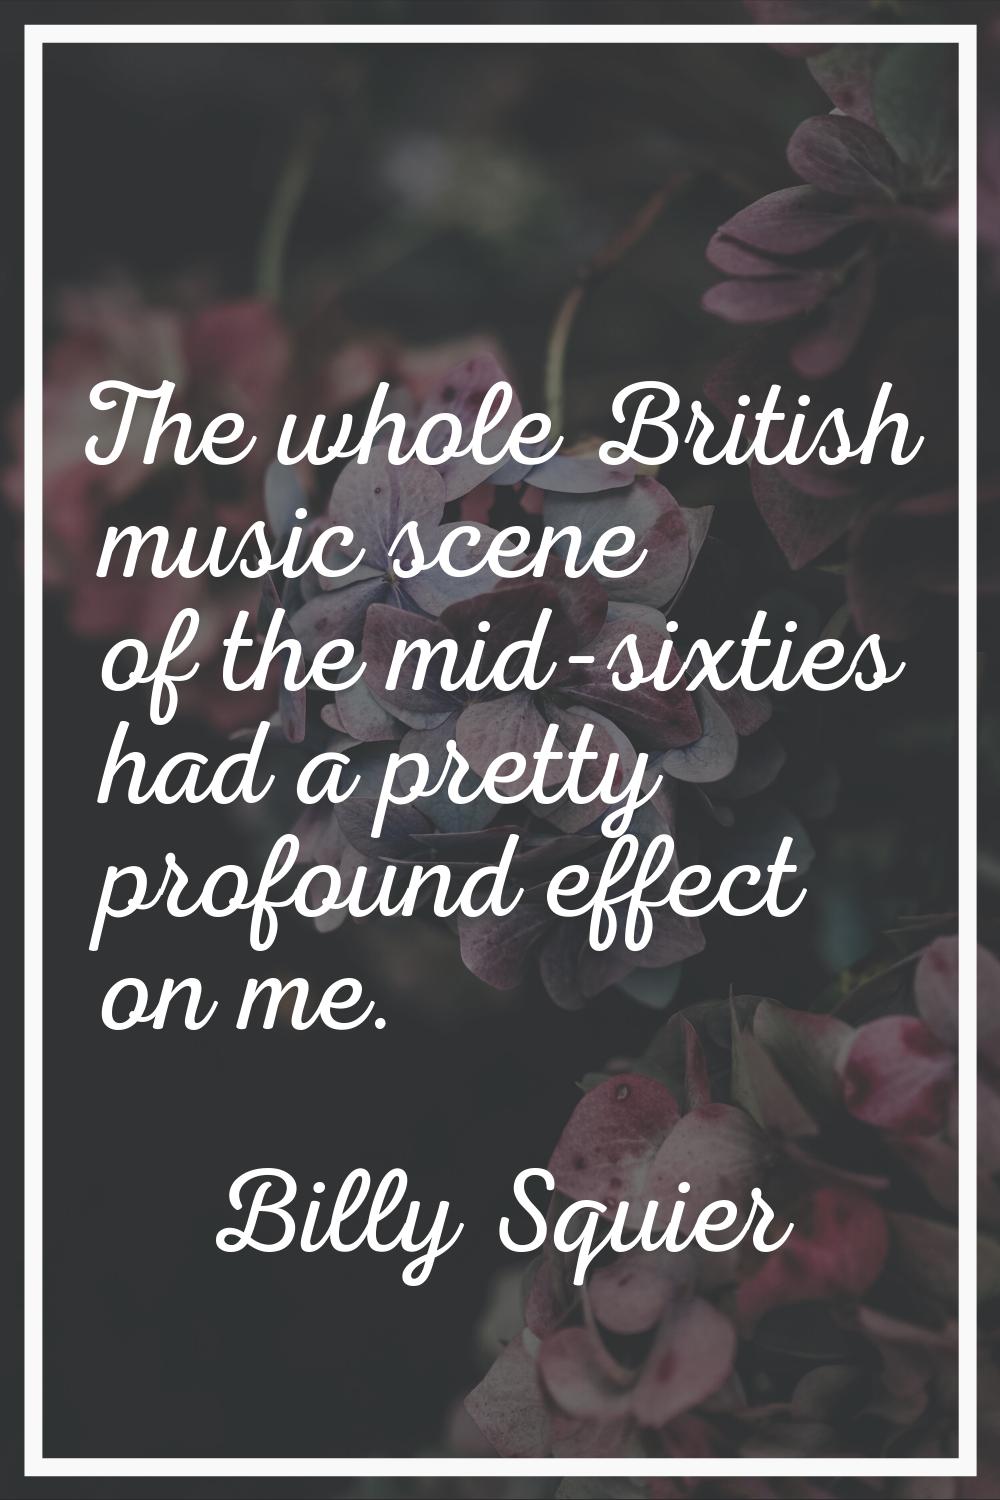 The whole British music scene of the mid-sixties had a pretty profound effect on me.